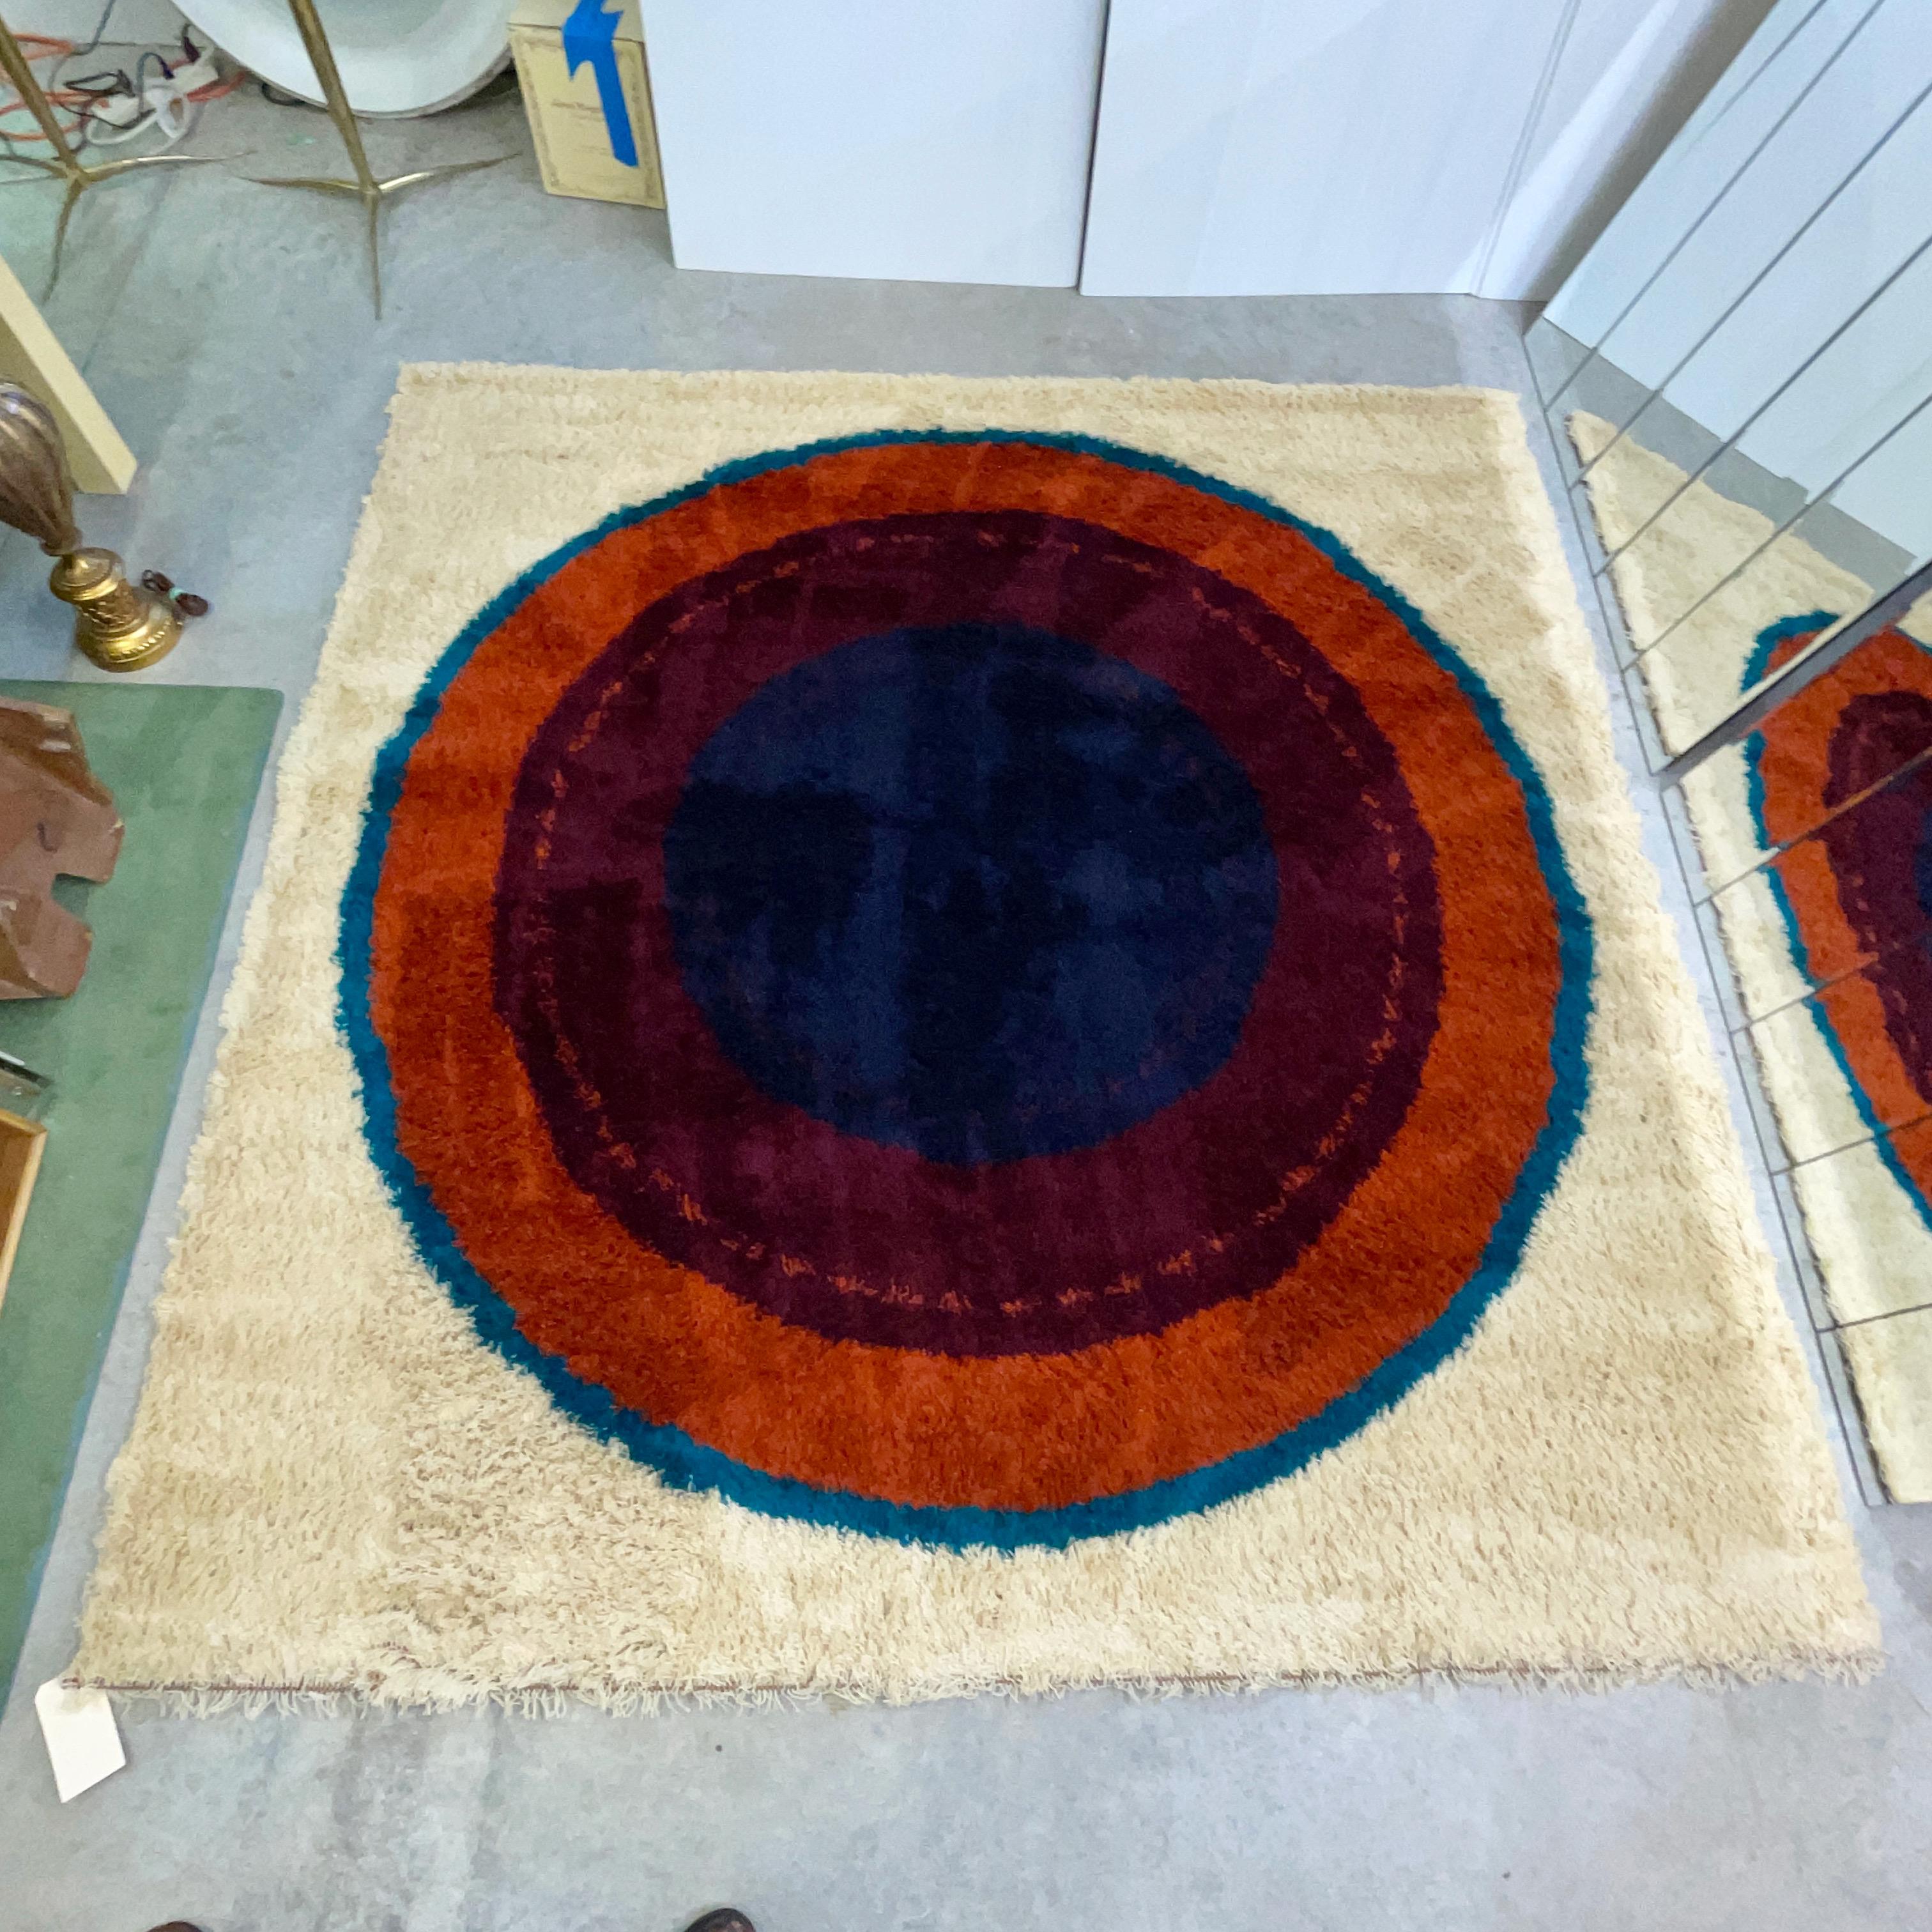 Vintage square Danish Rya rug, 100% wool, produced in the 1960's but never used. 
Has been kept rolled and wrapped in storage for over 50 years. Your feet will be the very first to walk on it.
Produced in Denmark by Hojer Eksport Wilton.
Design